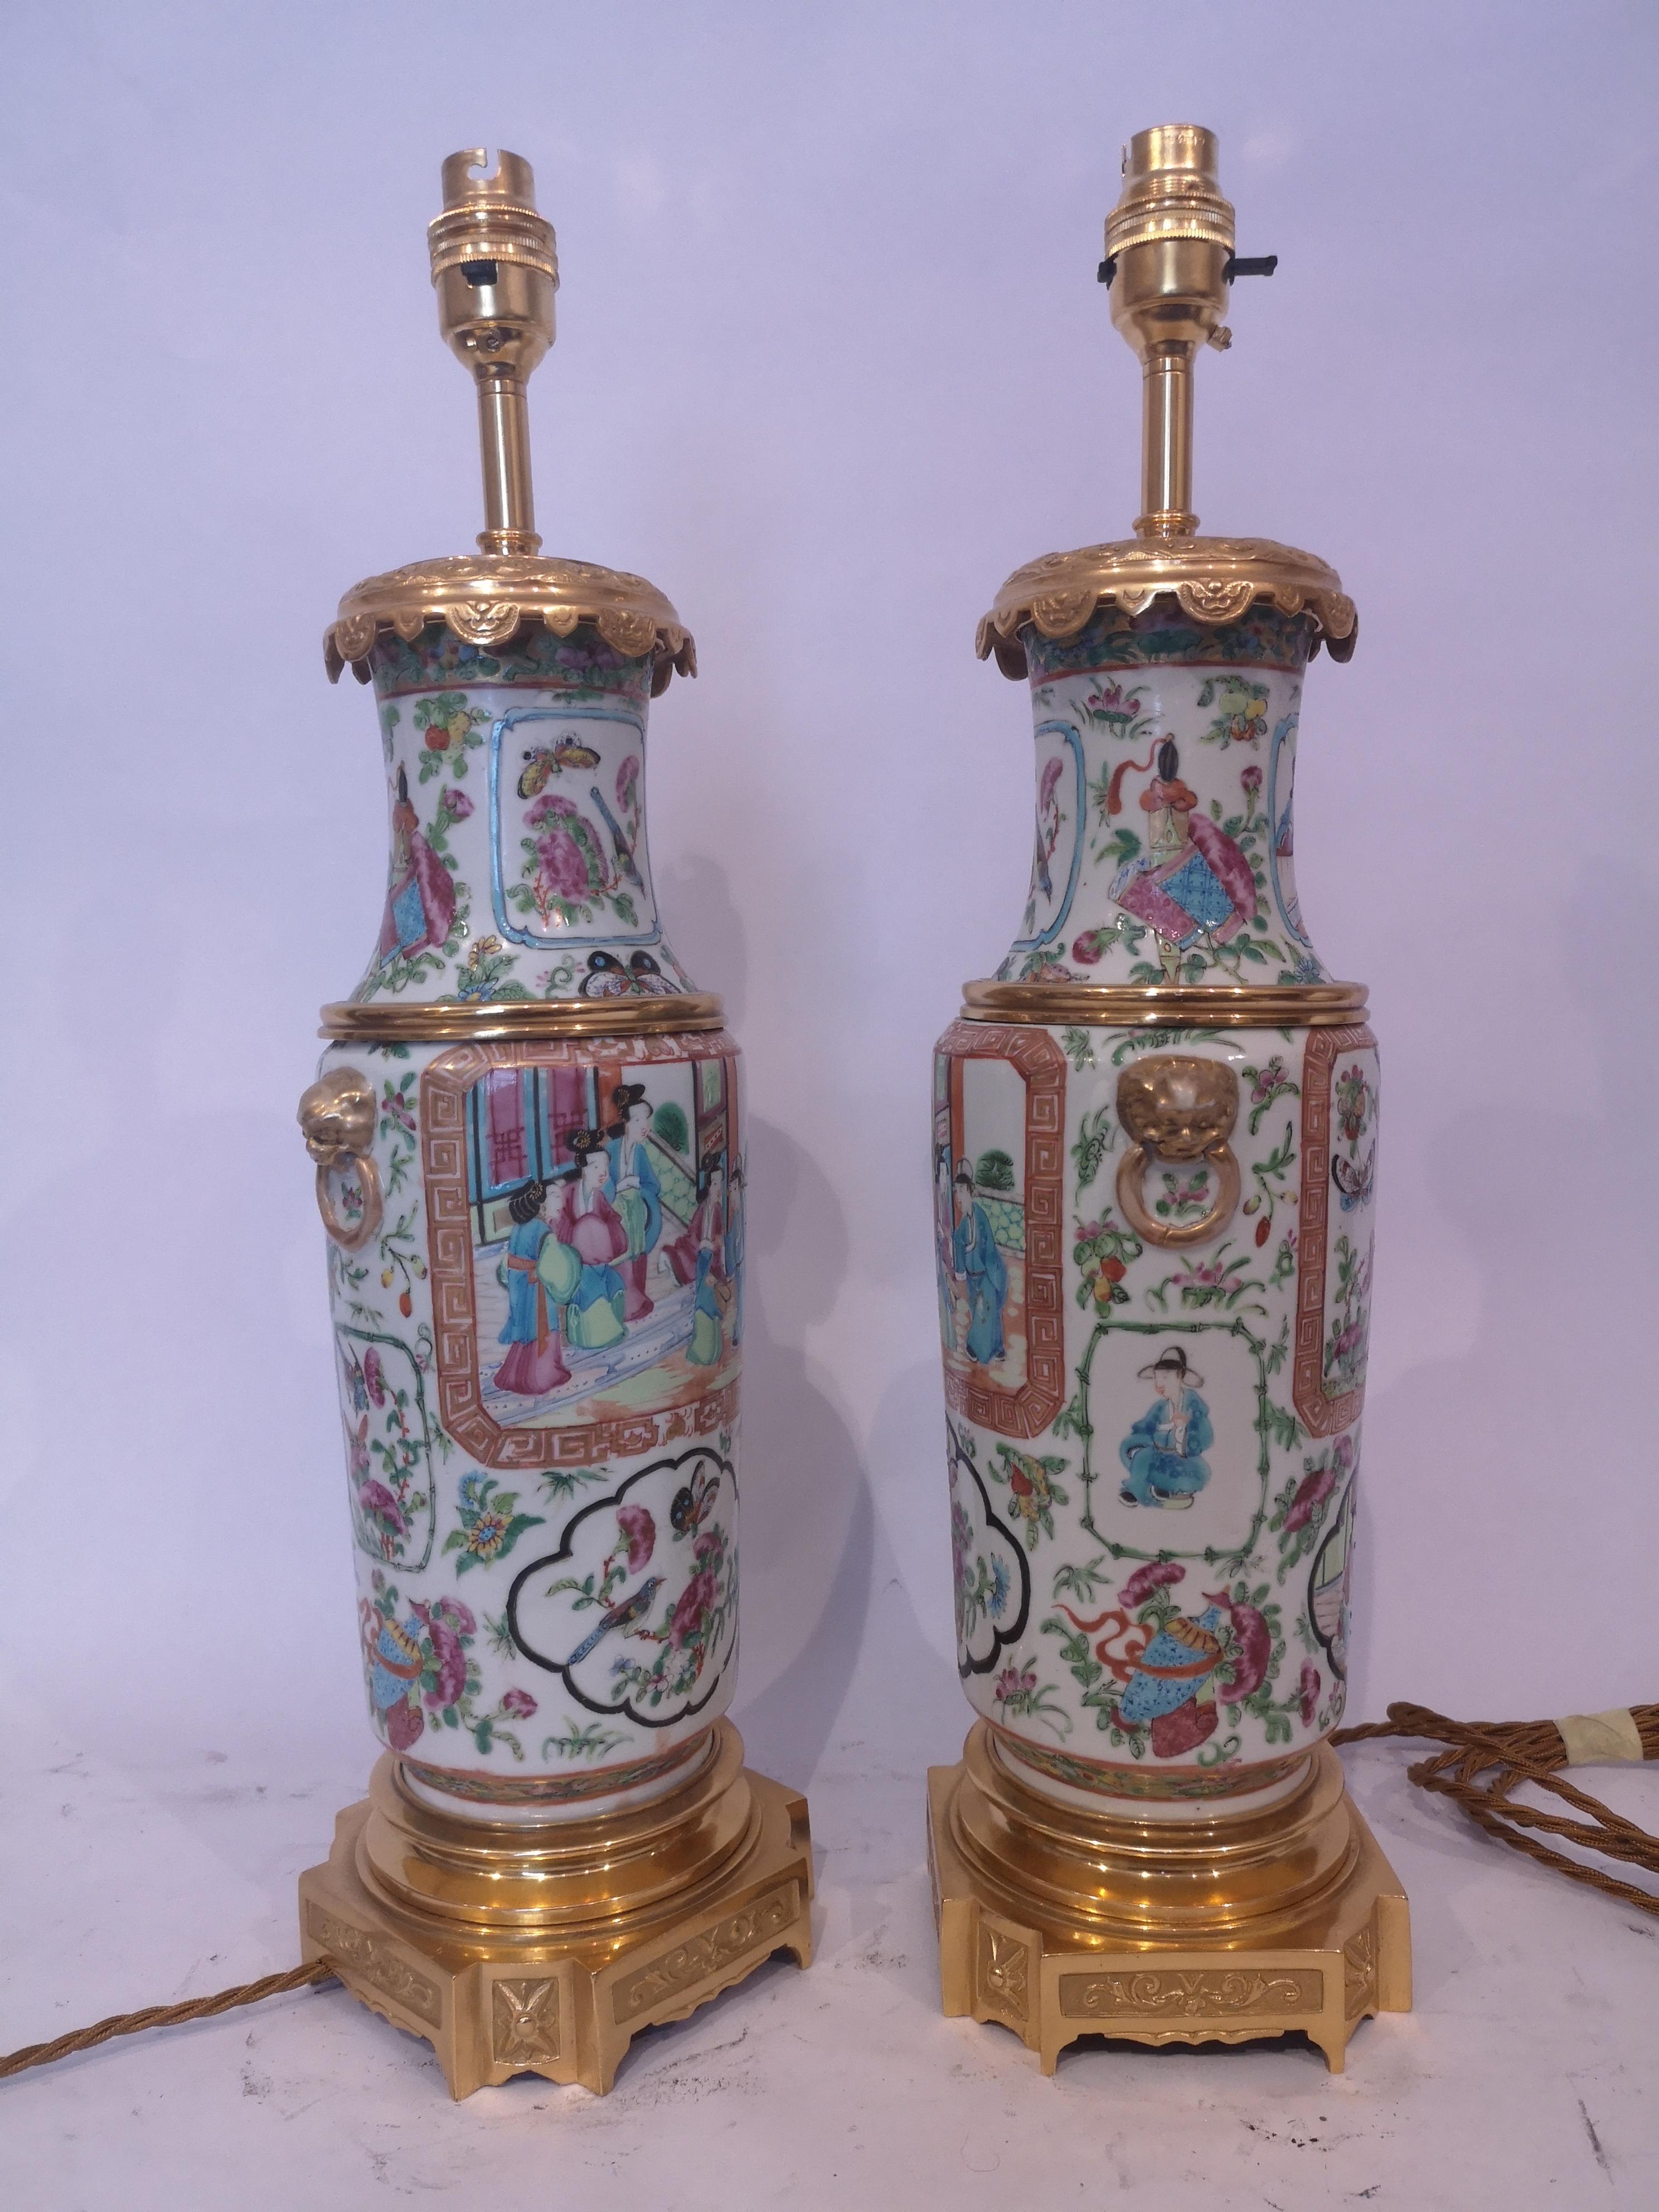 A pair of 19th century Chinese Famille rose pattern vases, with French gilt bronze mounts and now as lamps. The porcelain in typical Famille rose palette, decorated court figures, birds and flowers.
Re-wired for the UK.
Chinese, circa 1880.